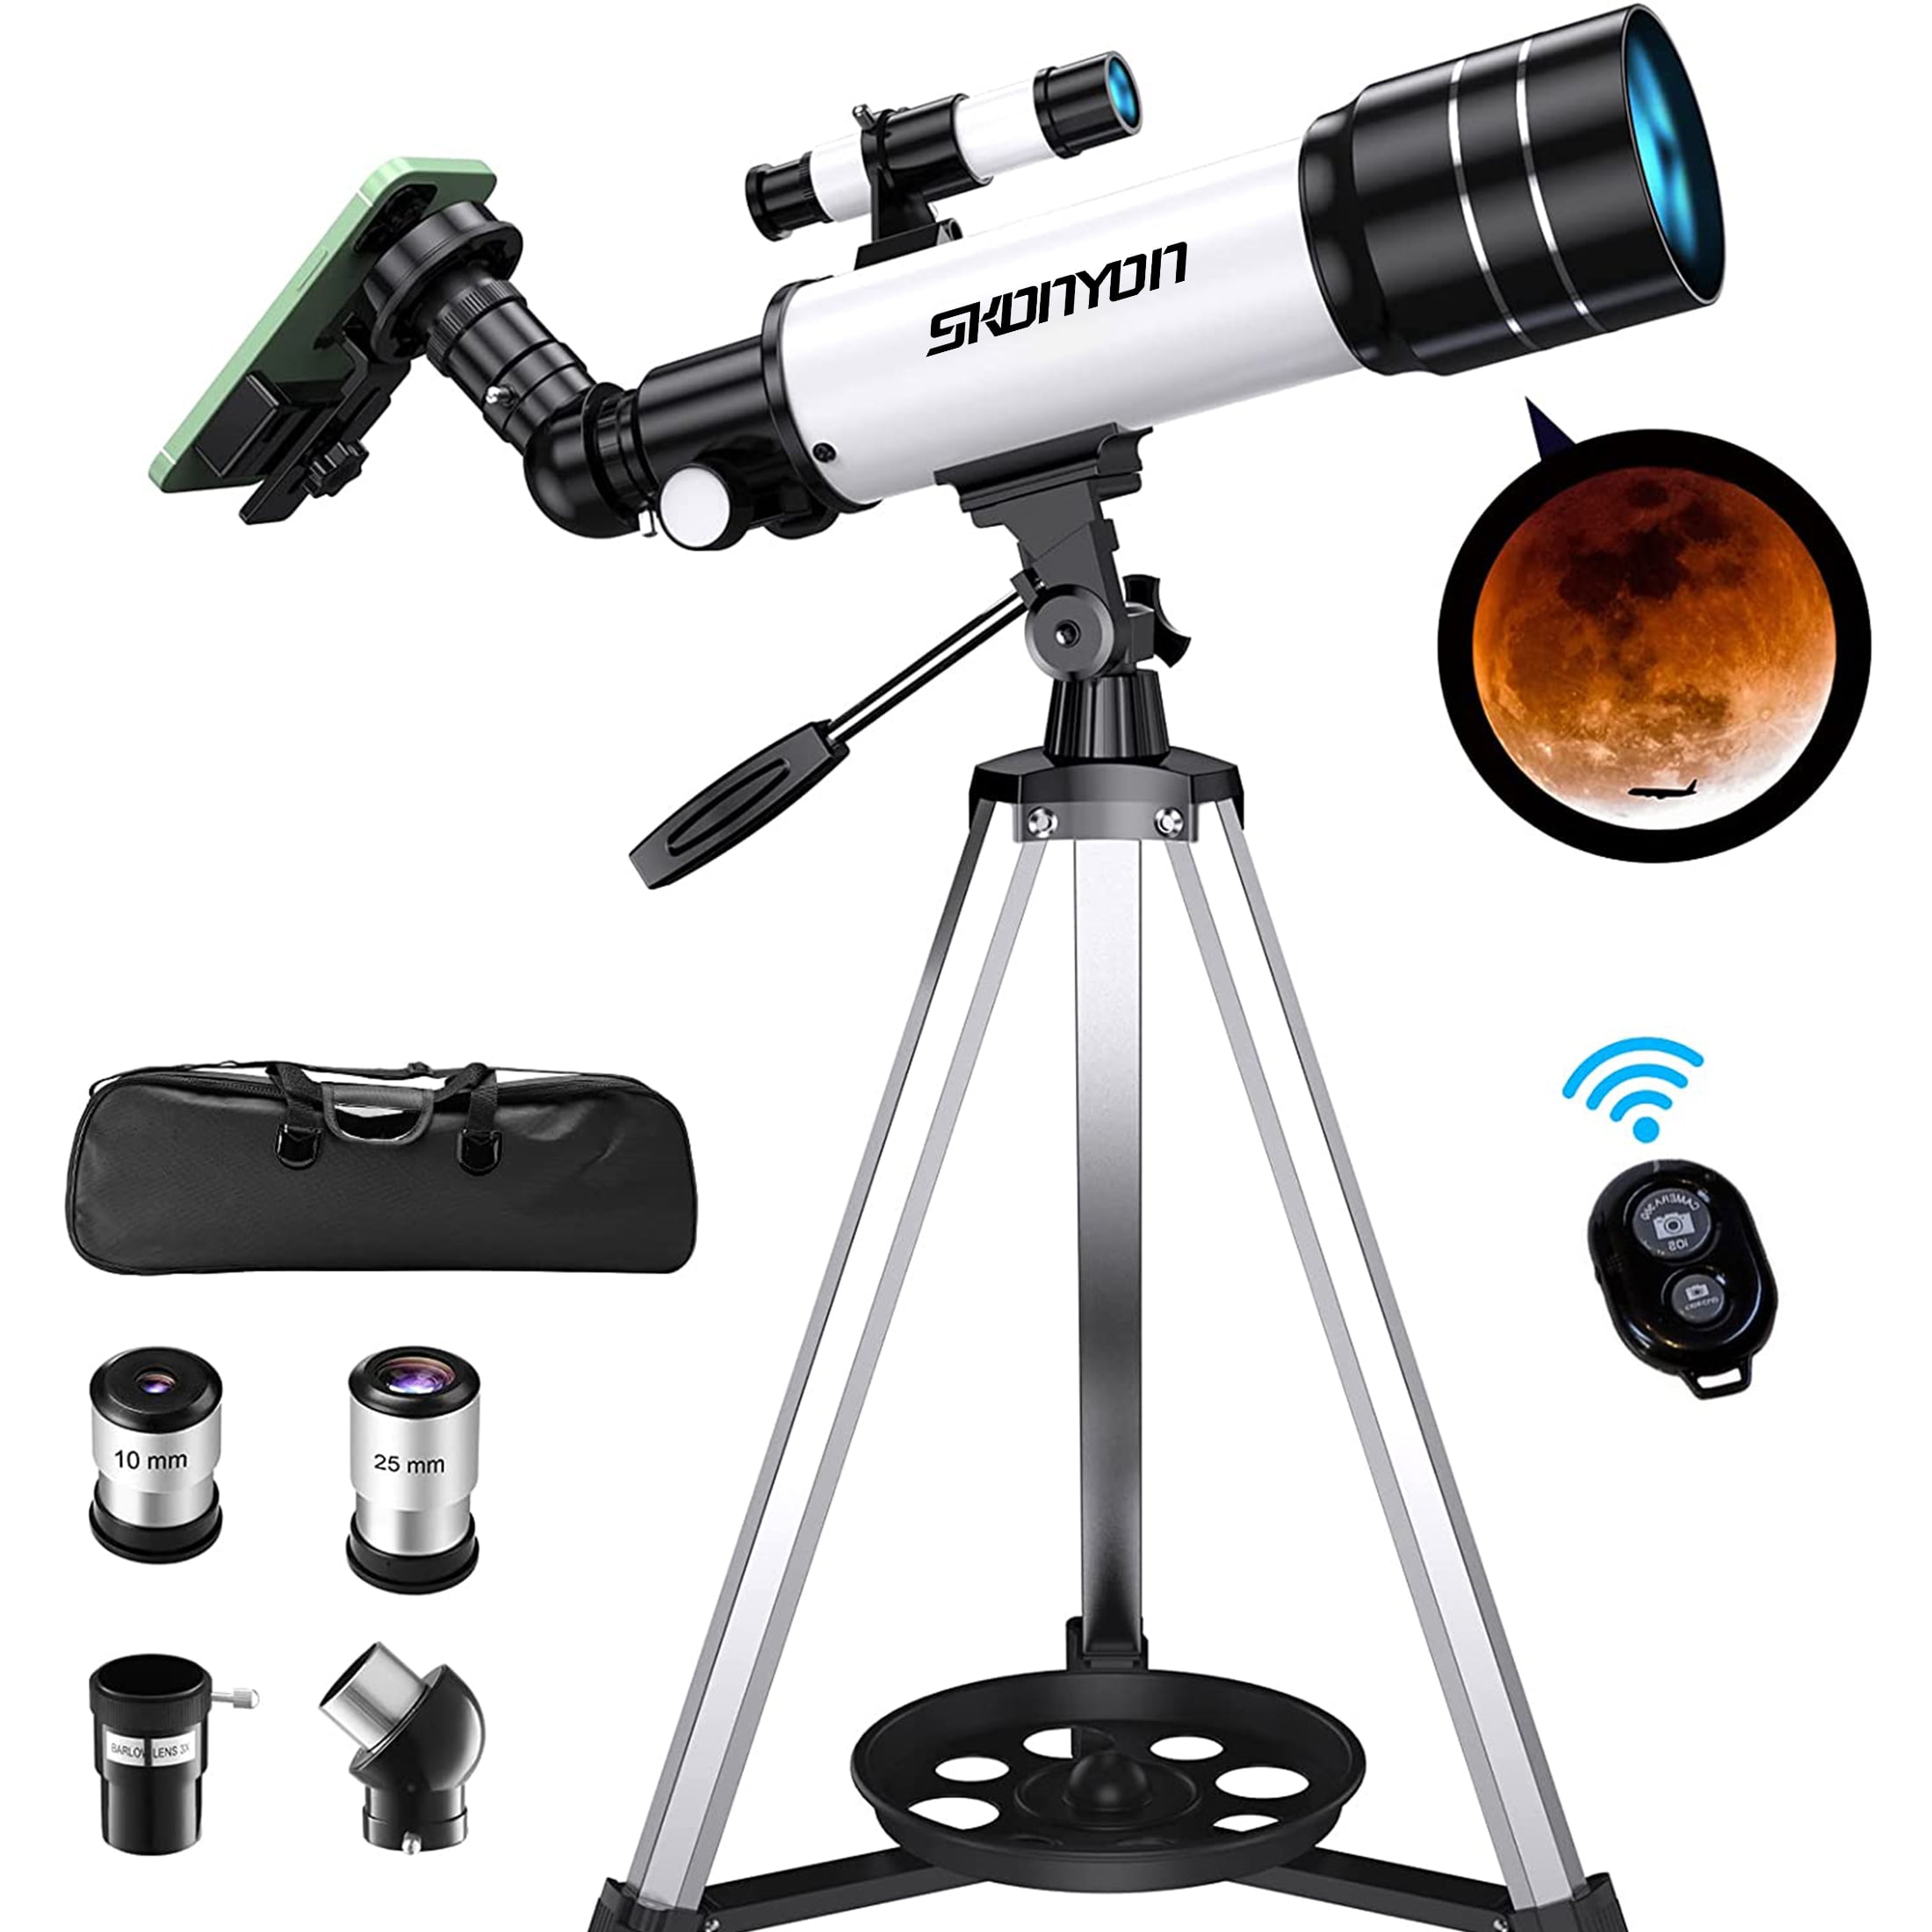 Astronomical Refractor Telescope Beginners Astronomy Telescope for Kids Adults Fully Multi-Coated Optics Compact and Portable Portable Travel with an Tripod Height Adjustable Mount,Backpack 